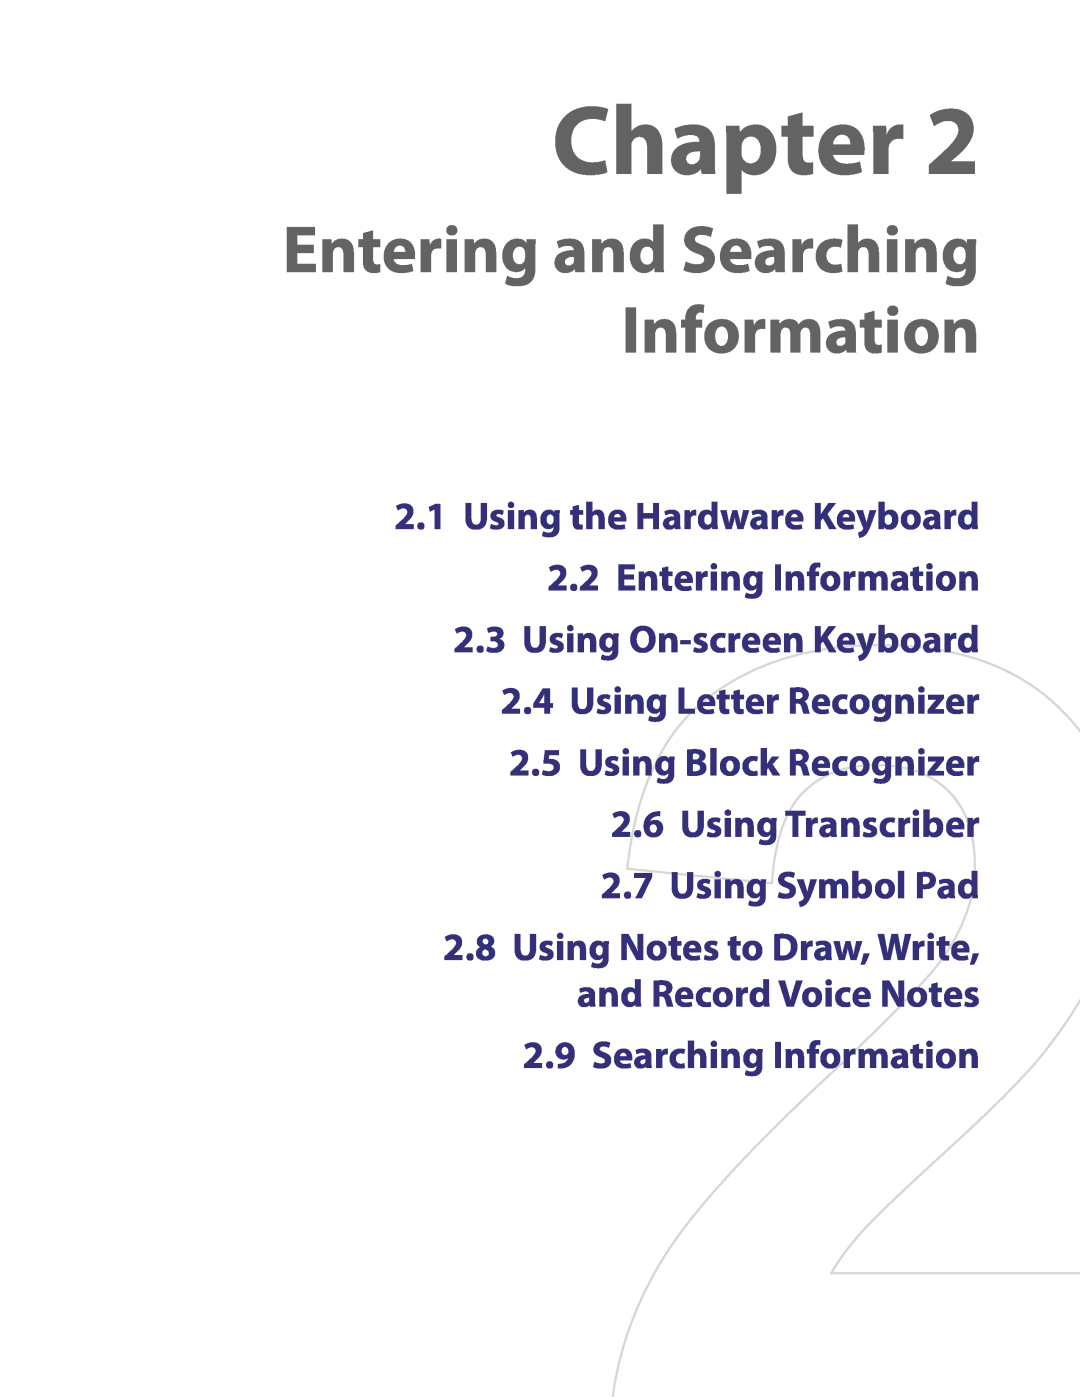 HTC PDA Phone user manual Entering and Searching Information, Using the Hardware Keyboard 2.2 Entering Information, Chapter 